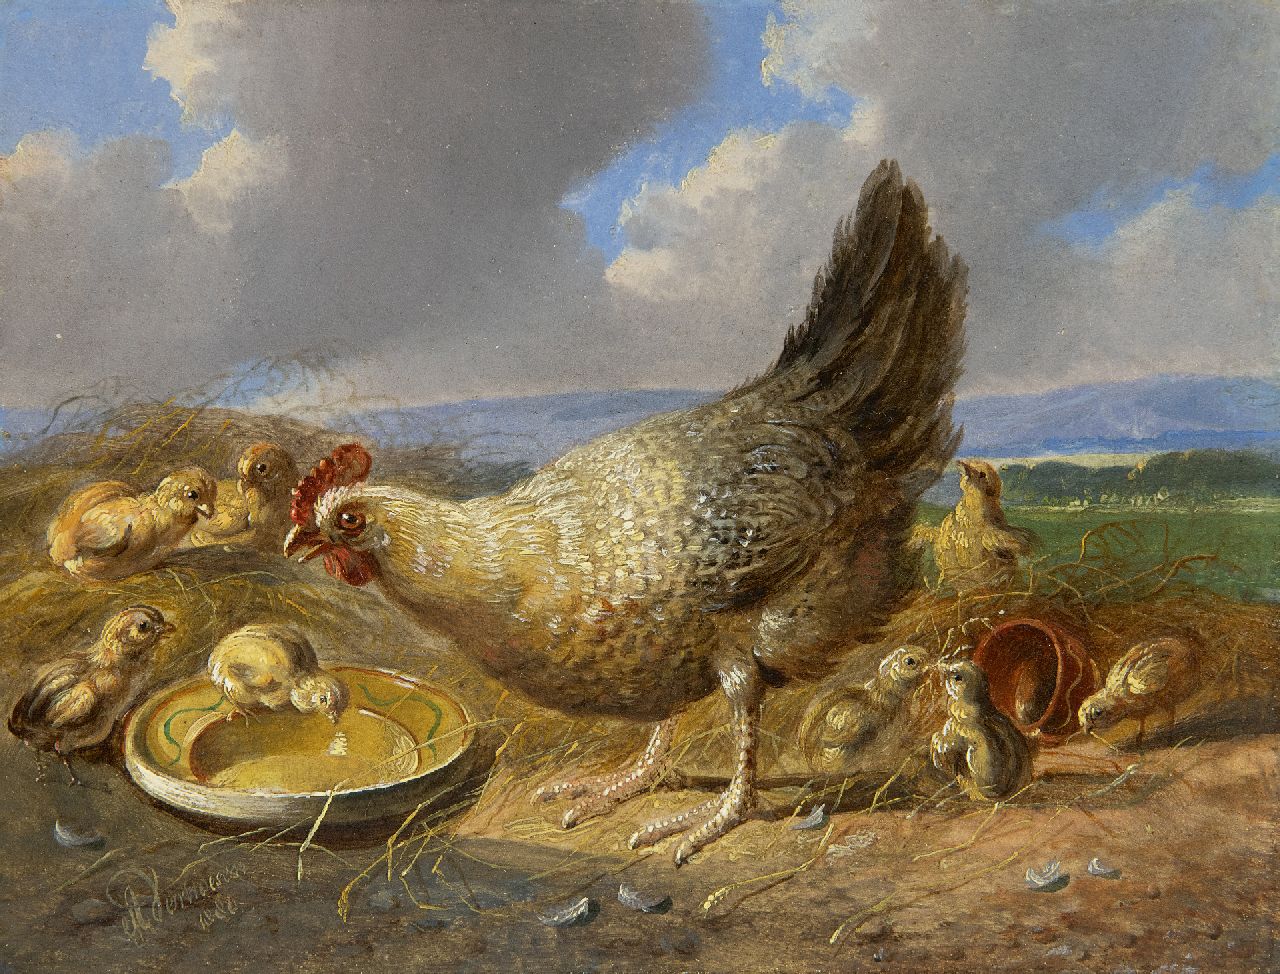 Verhoesen A.  | Albertus Verhoesen | Paintings offered for sale | Hen with chicks in extensive landscape (pair with 21929), oil on panel 14.5 x 19.3 cm, signed l.r. and dated 1880